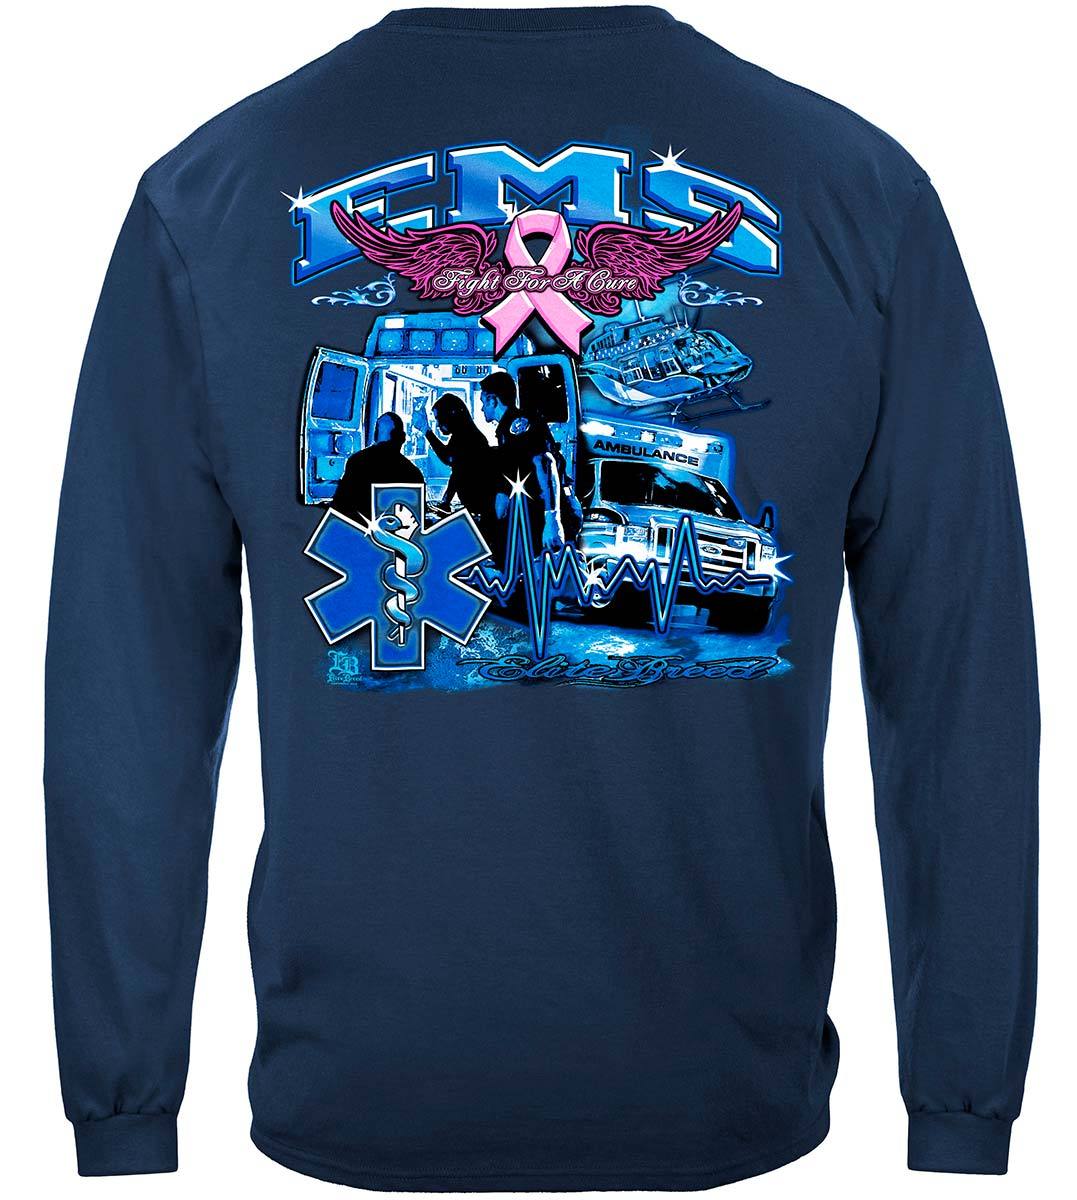 Elite Breed EMS Fight Cancer Premium Long Sleeves